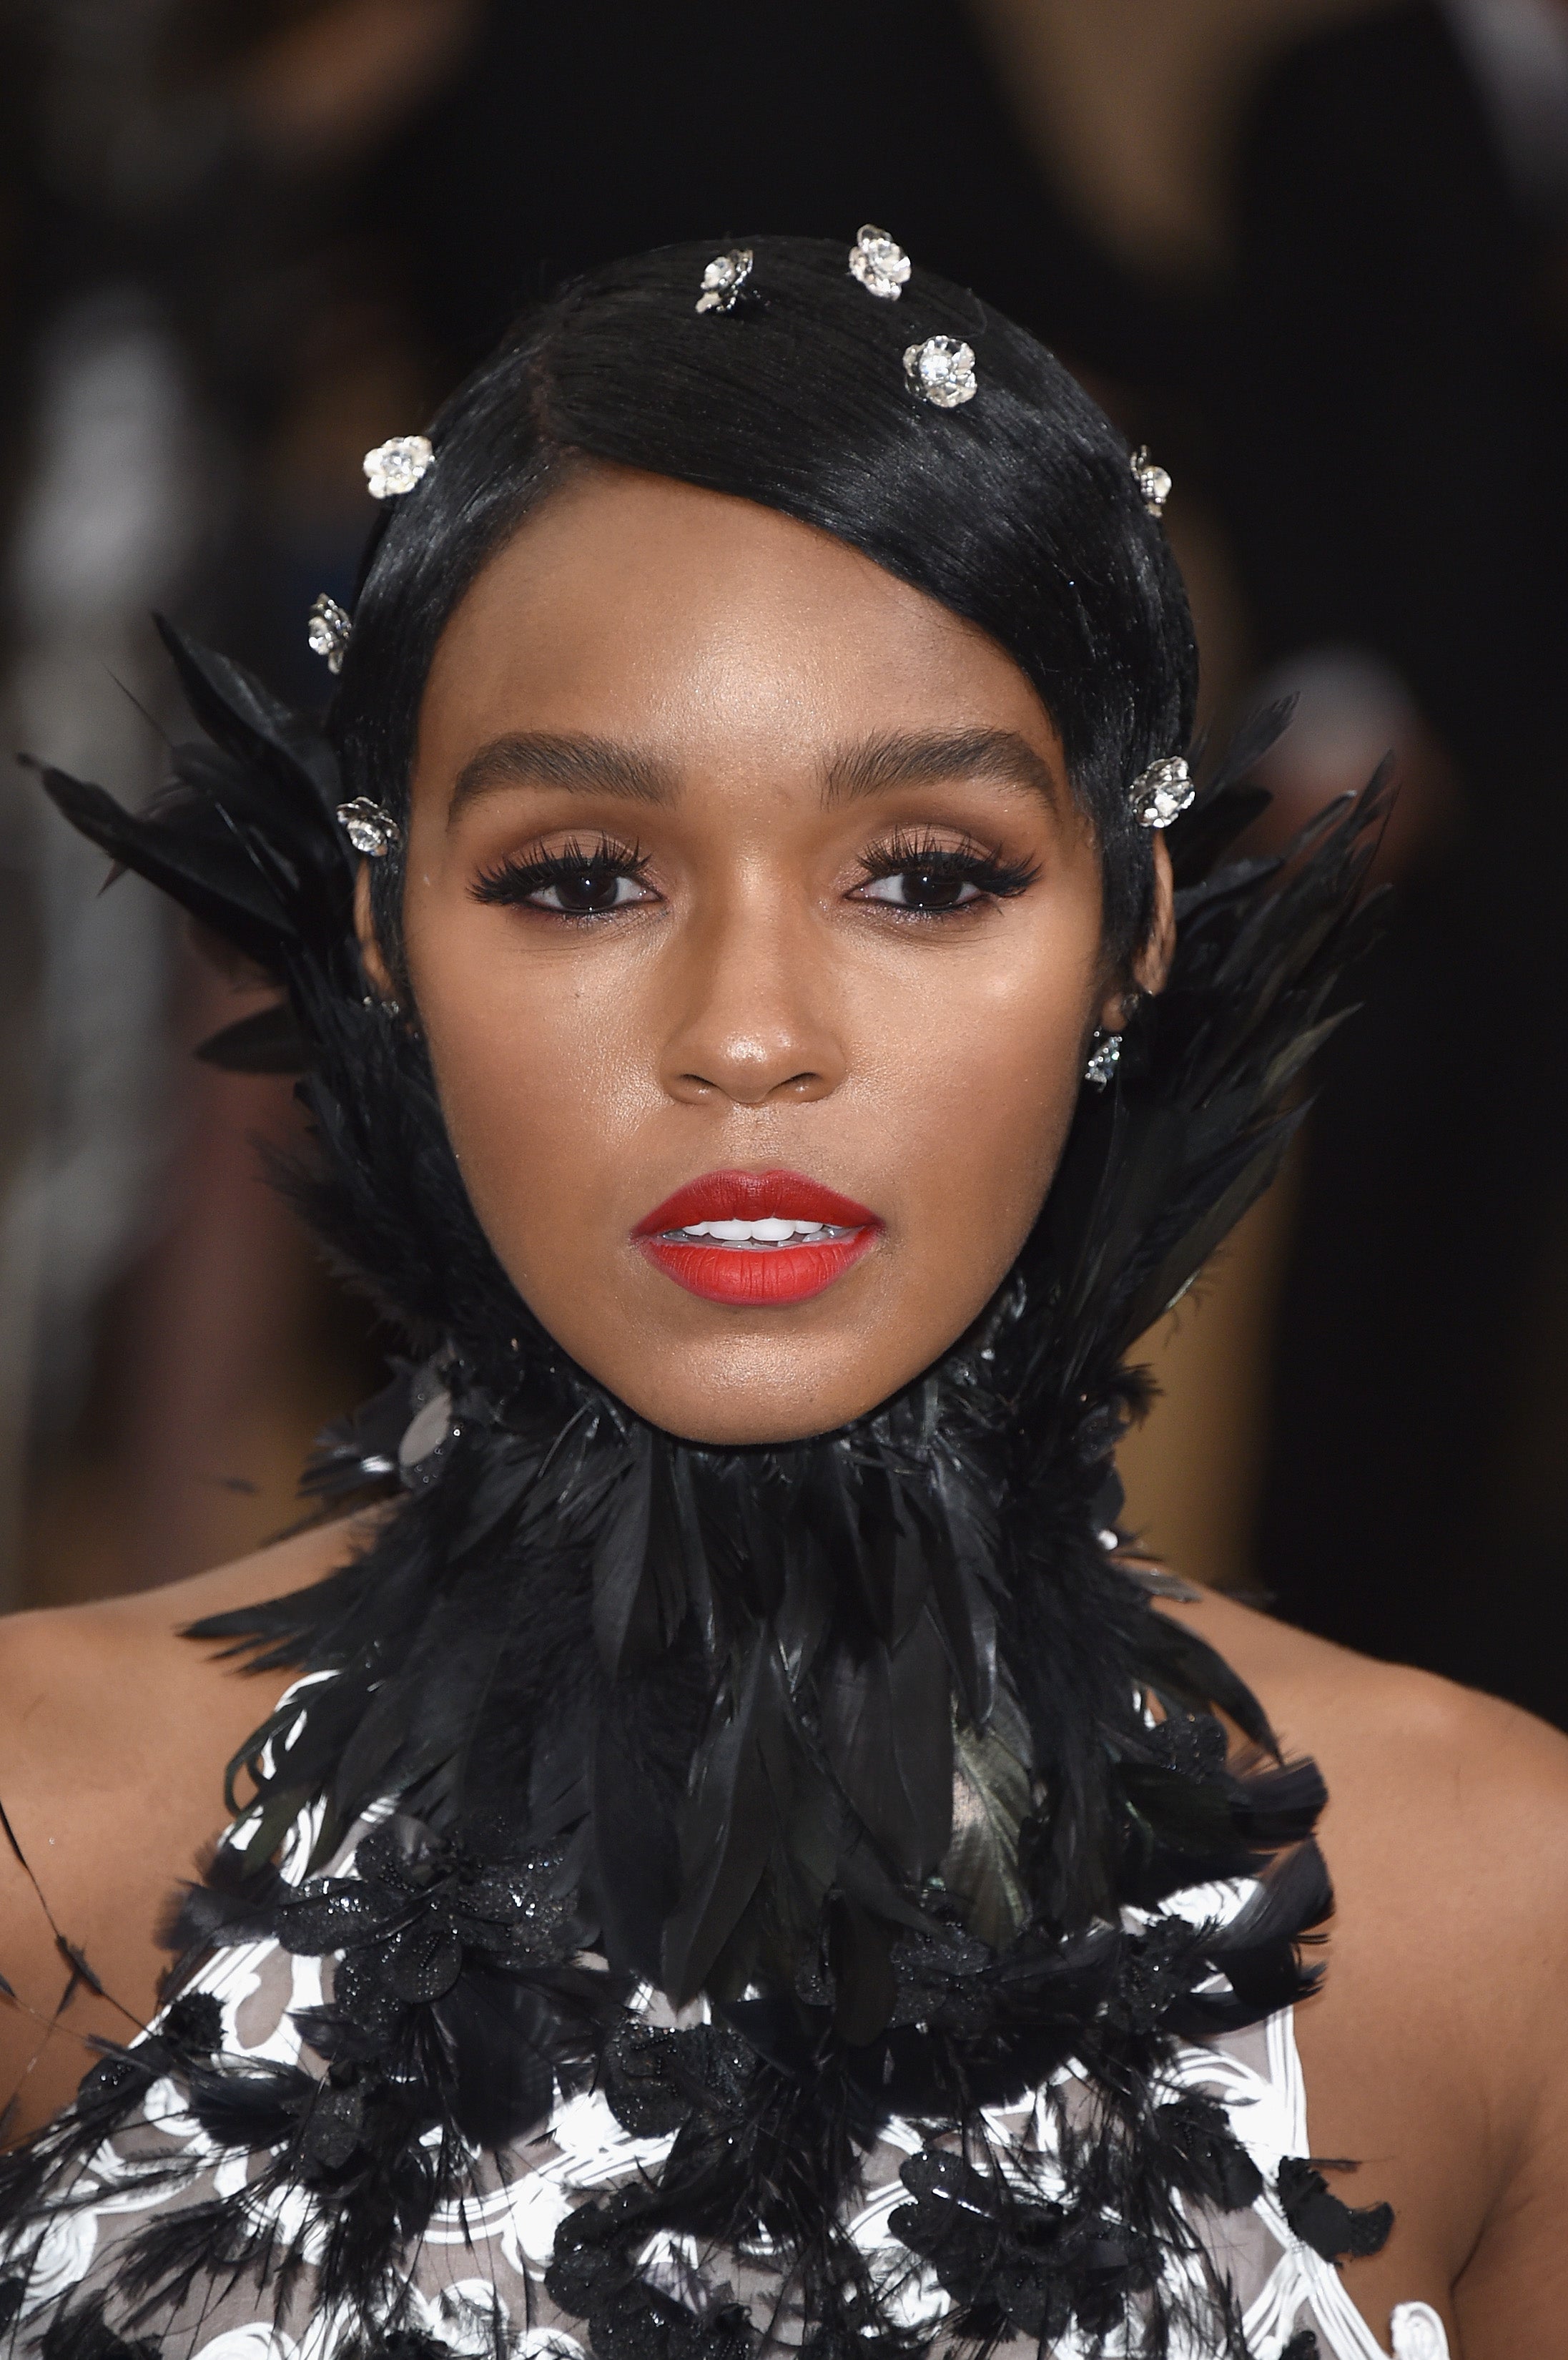 The 2017 Met Gala Beauty Looks We'll Be Talking About For Weeks
